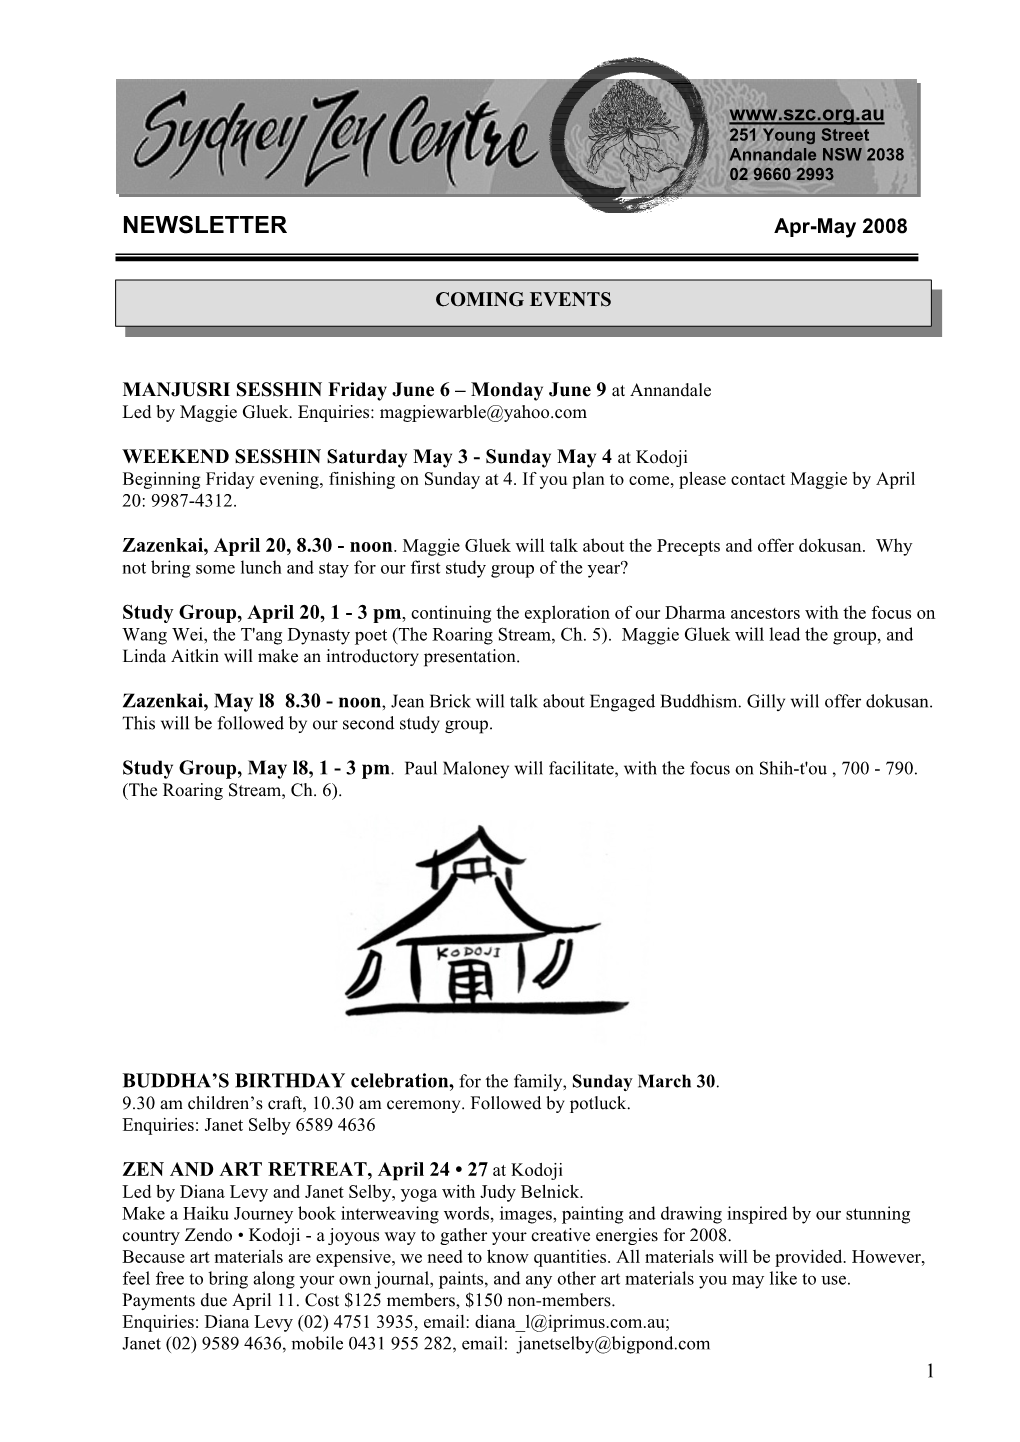 NEWSLETTER Apr-May 2008